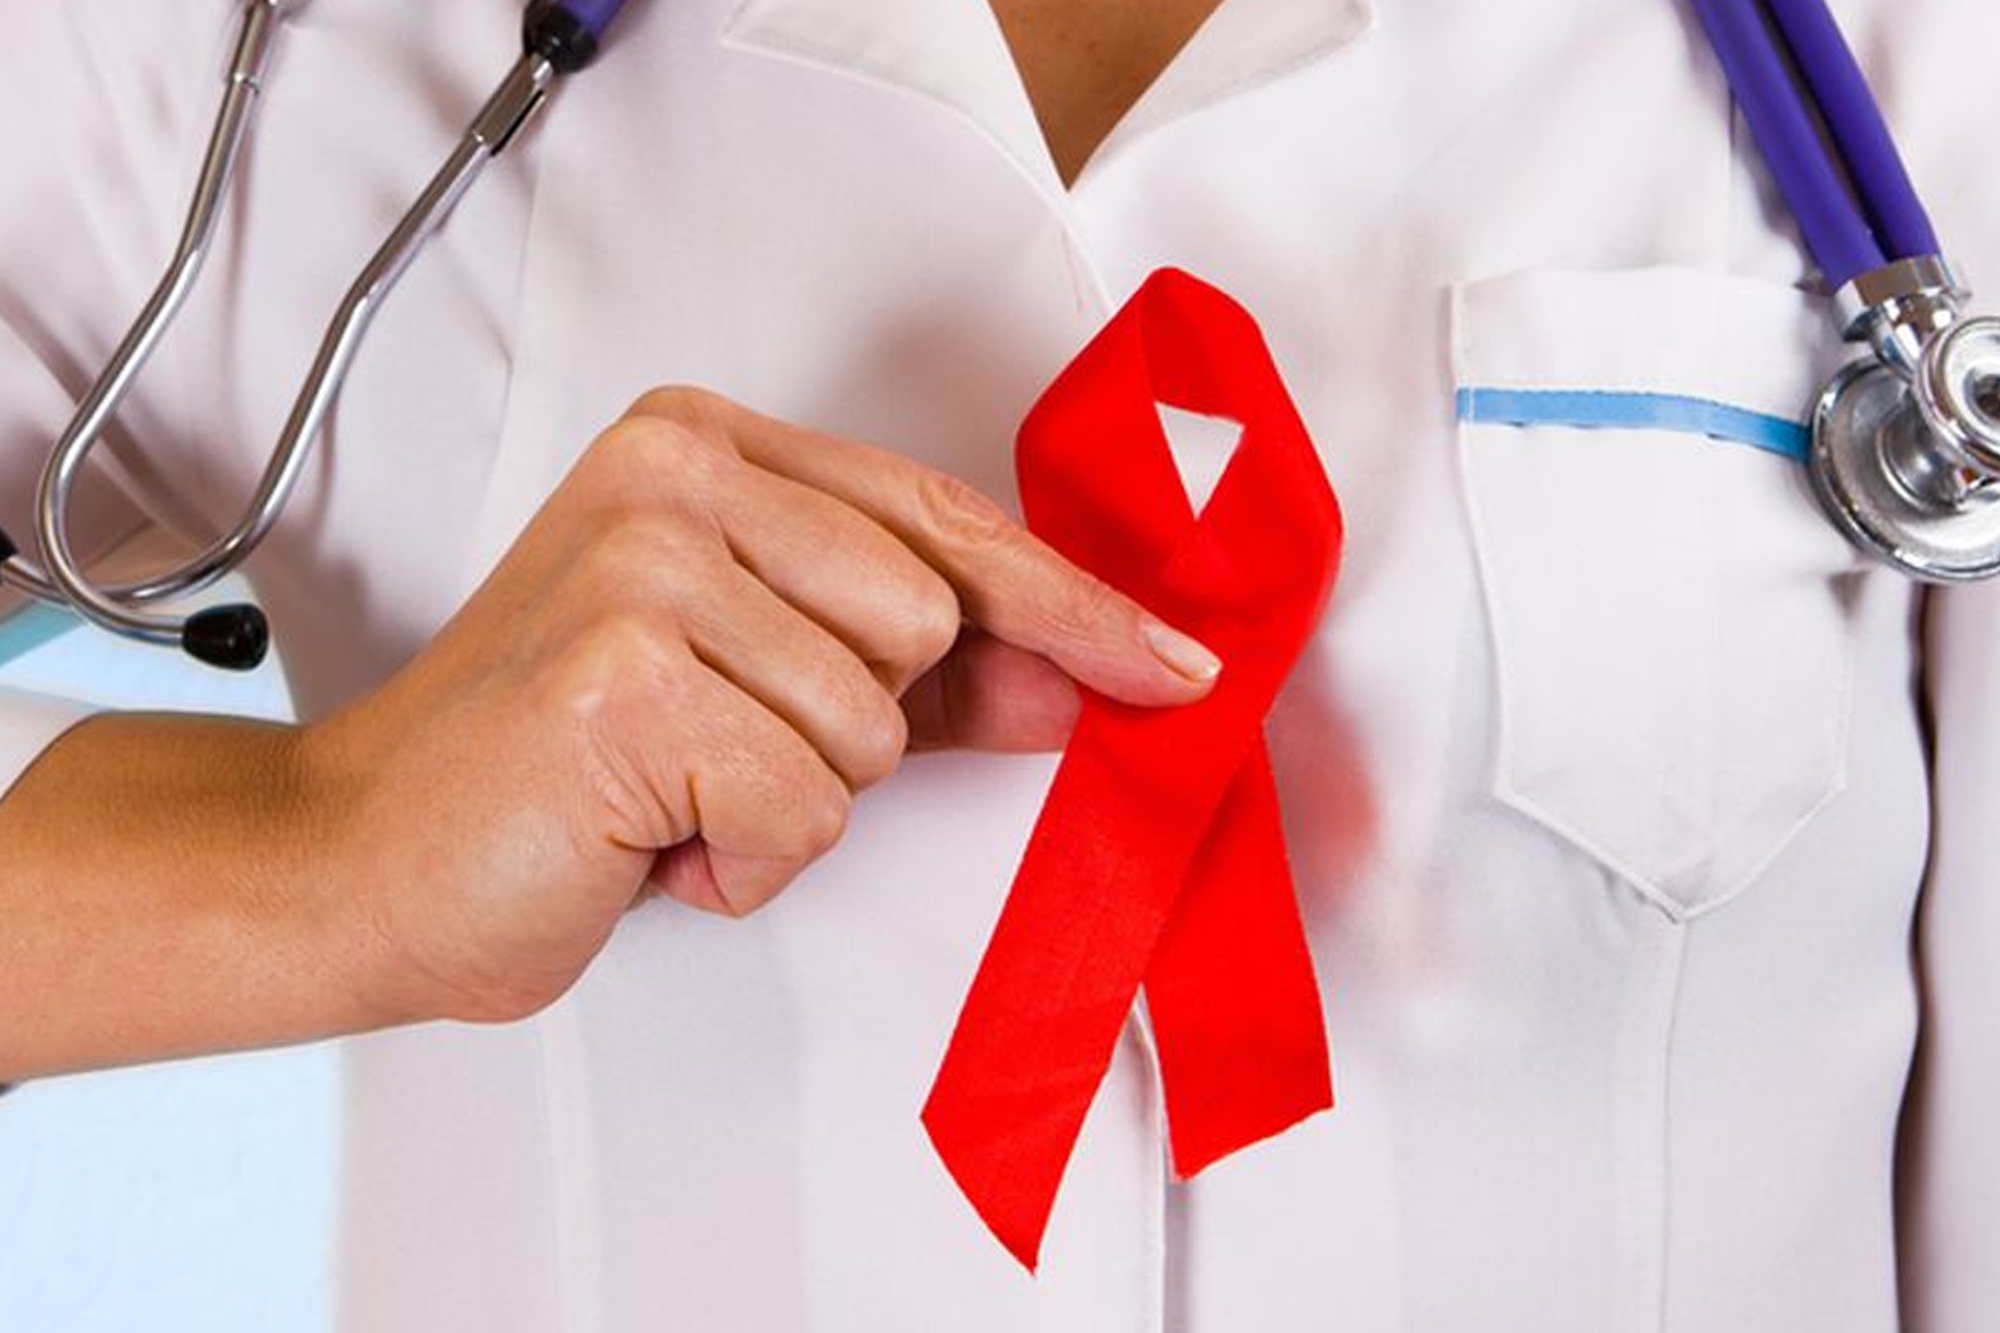 Understanding The Causes, Diagnosis, And Treatment Of HIV/AIDS